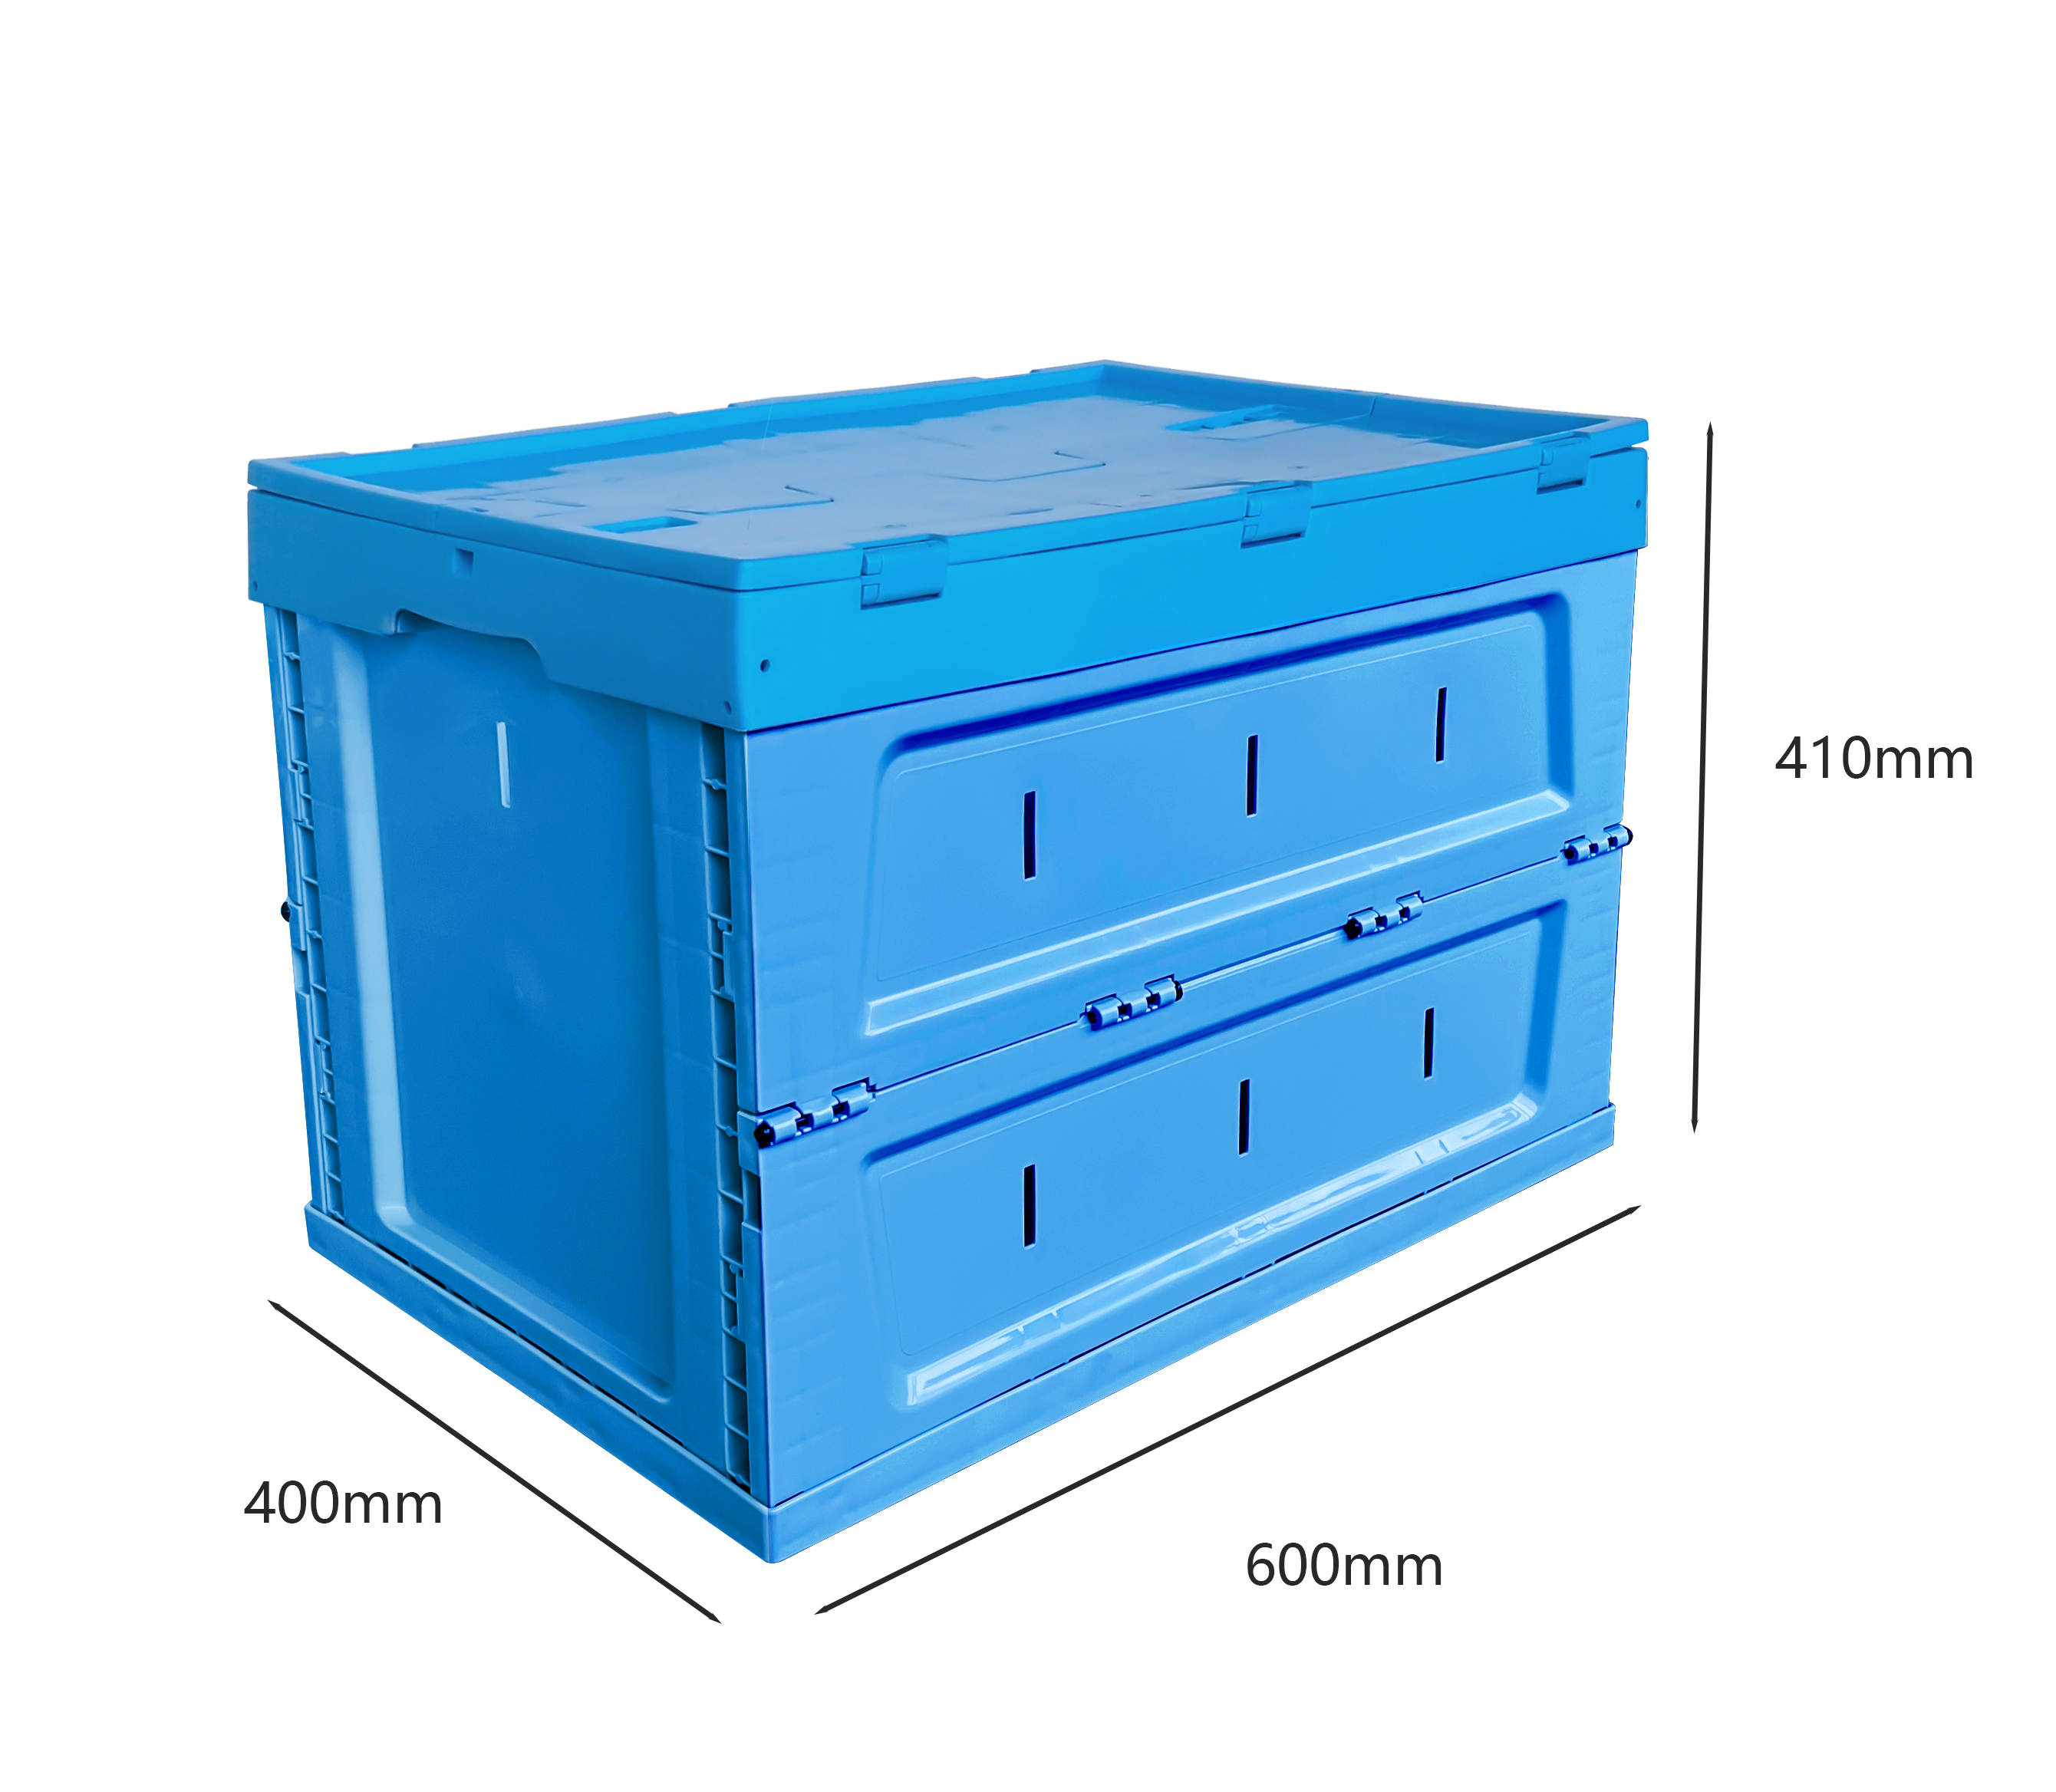 600*400*410 mm reusable transportation use plastic material collapsible crate and moving box